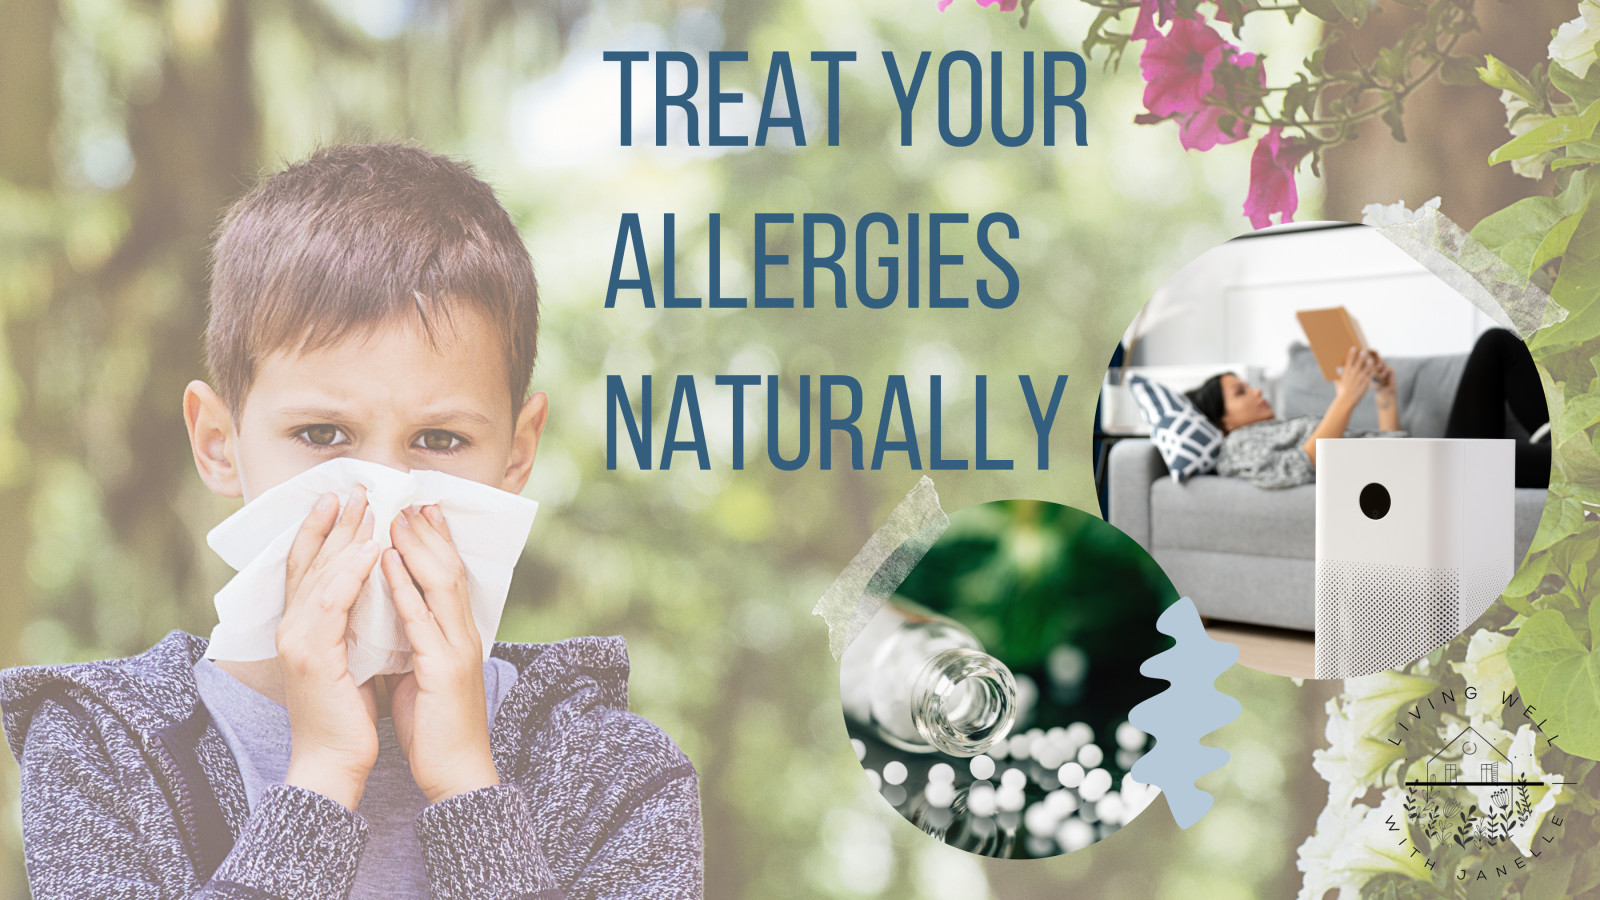 Solving allergies naturally!